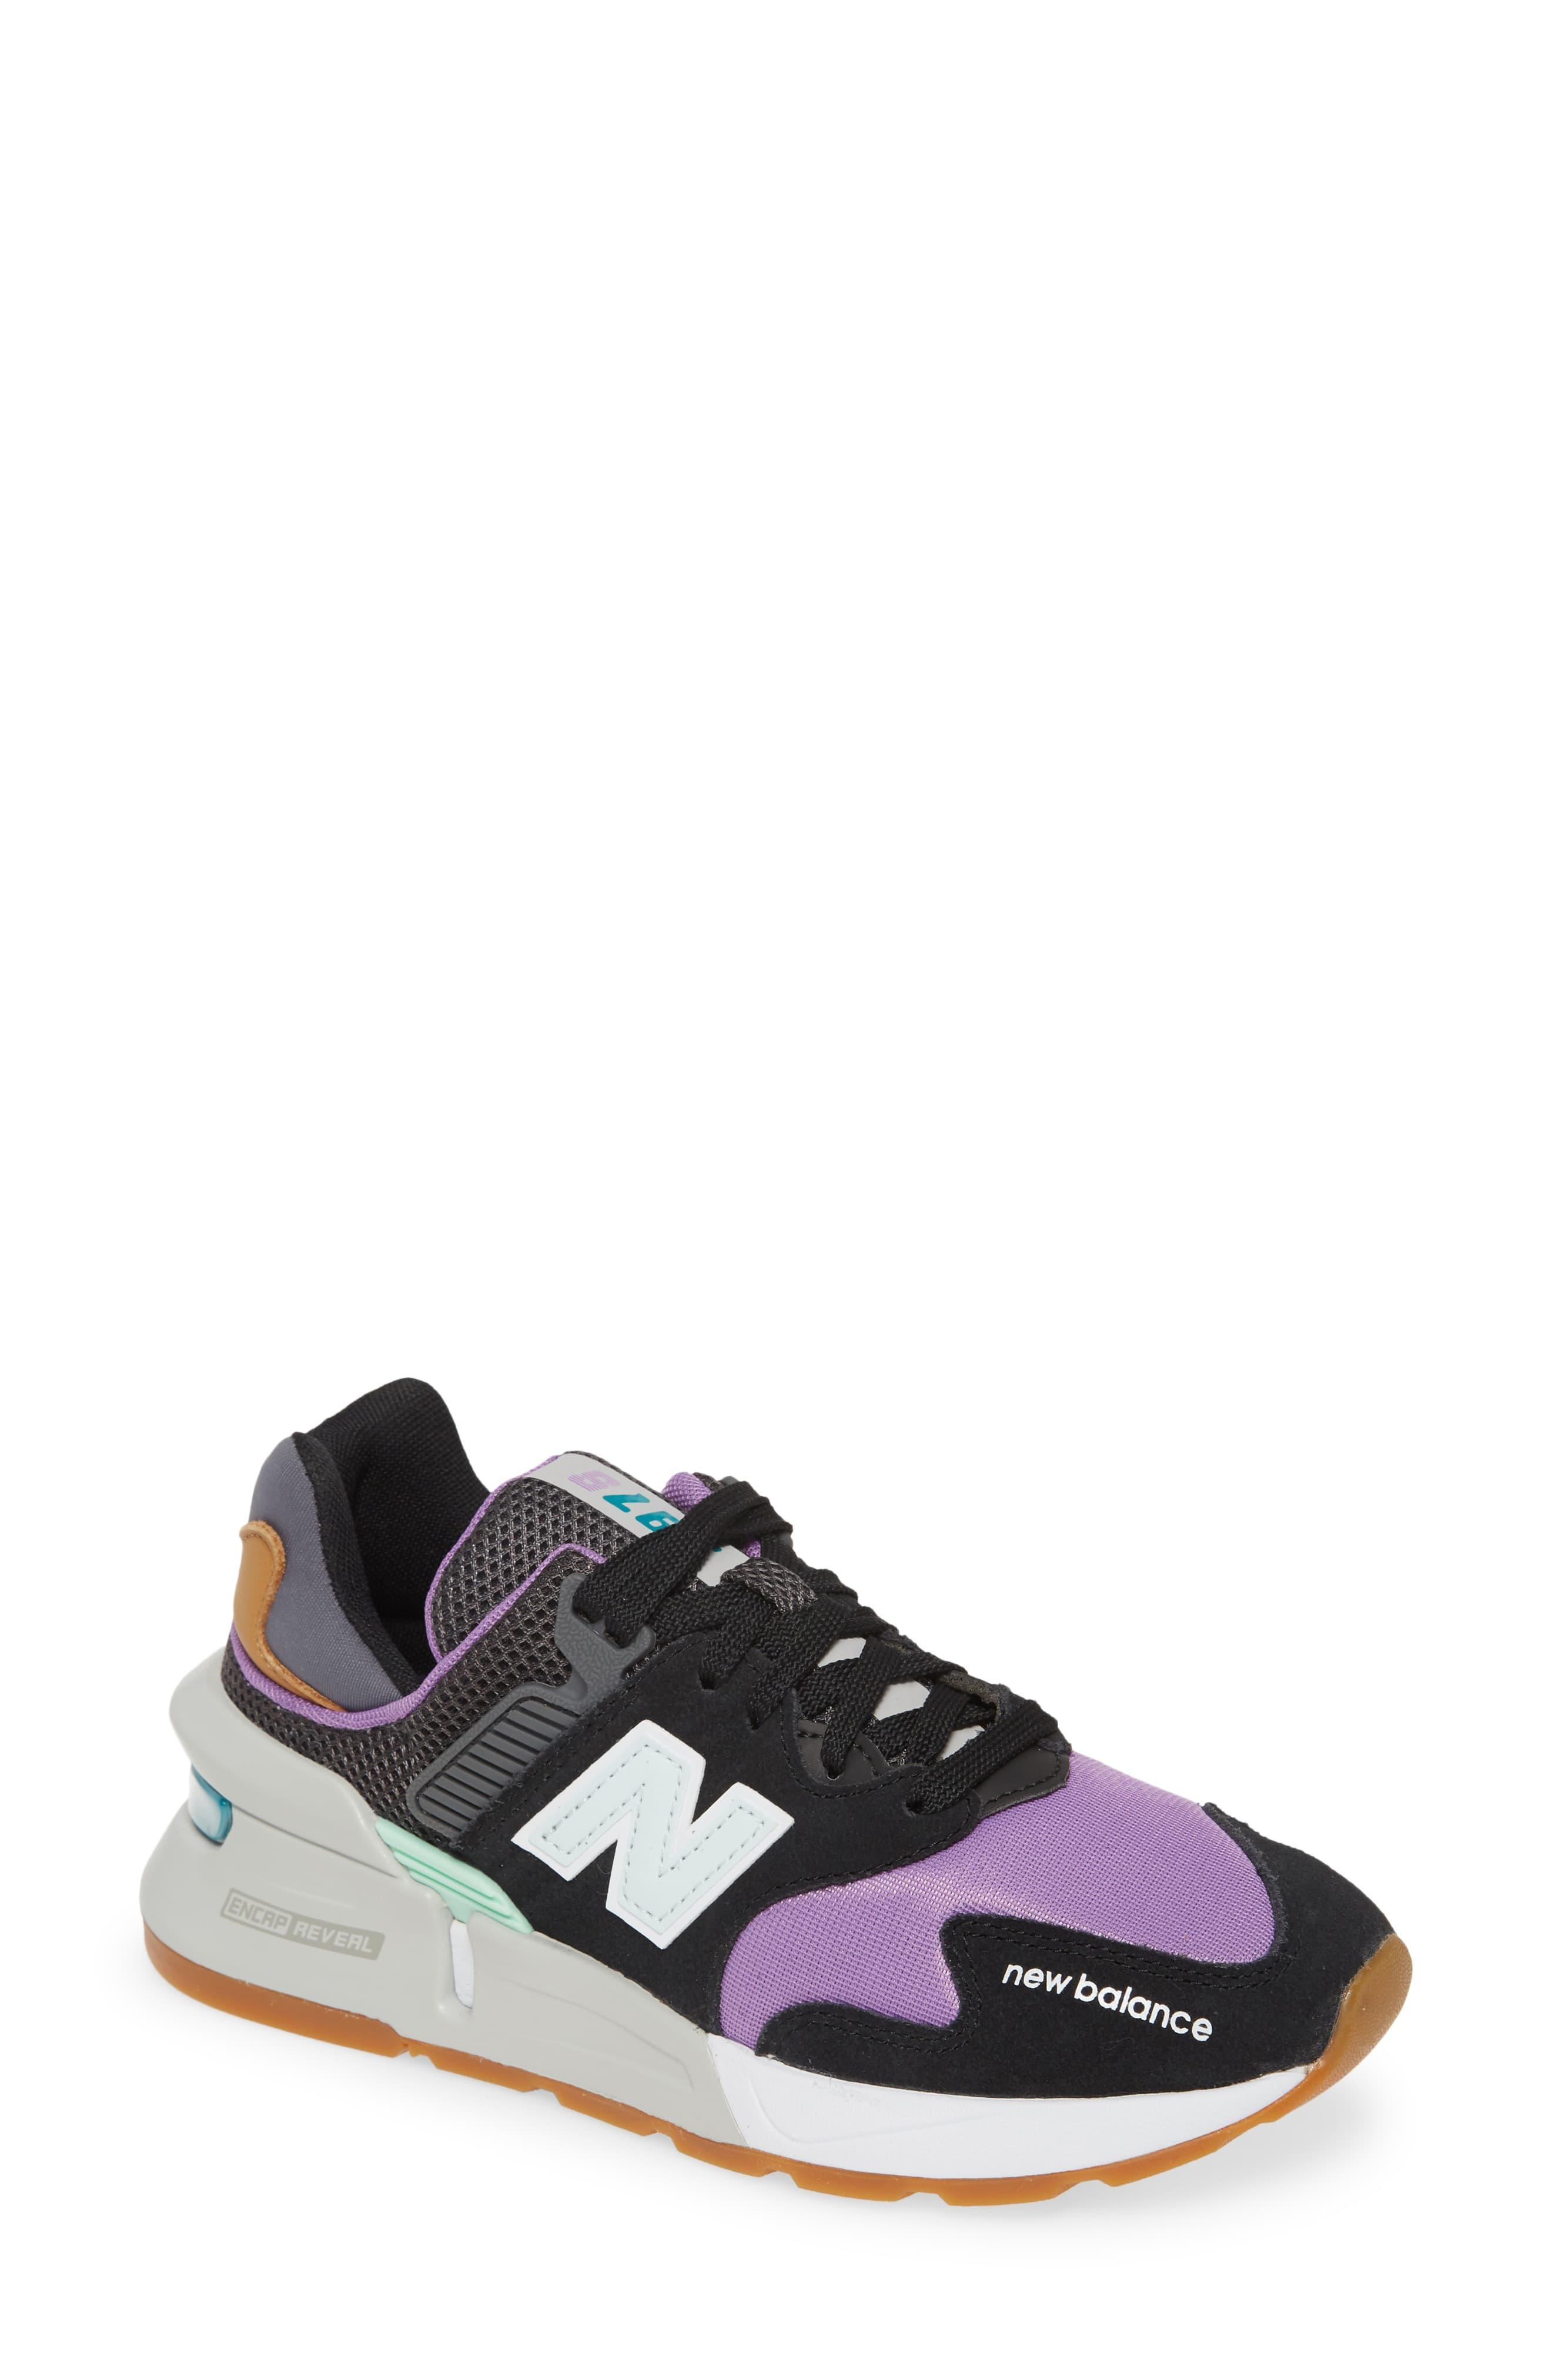 New Balance Rubber Ws997 W Shoes in Black - Save 38% | Lyst